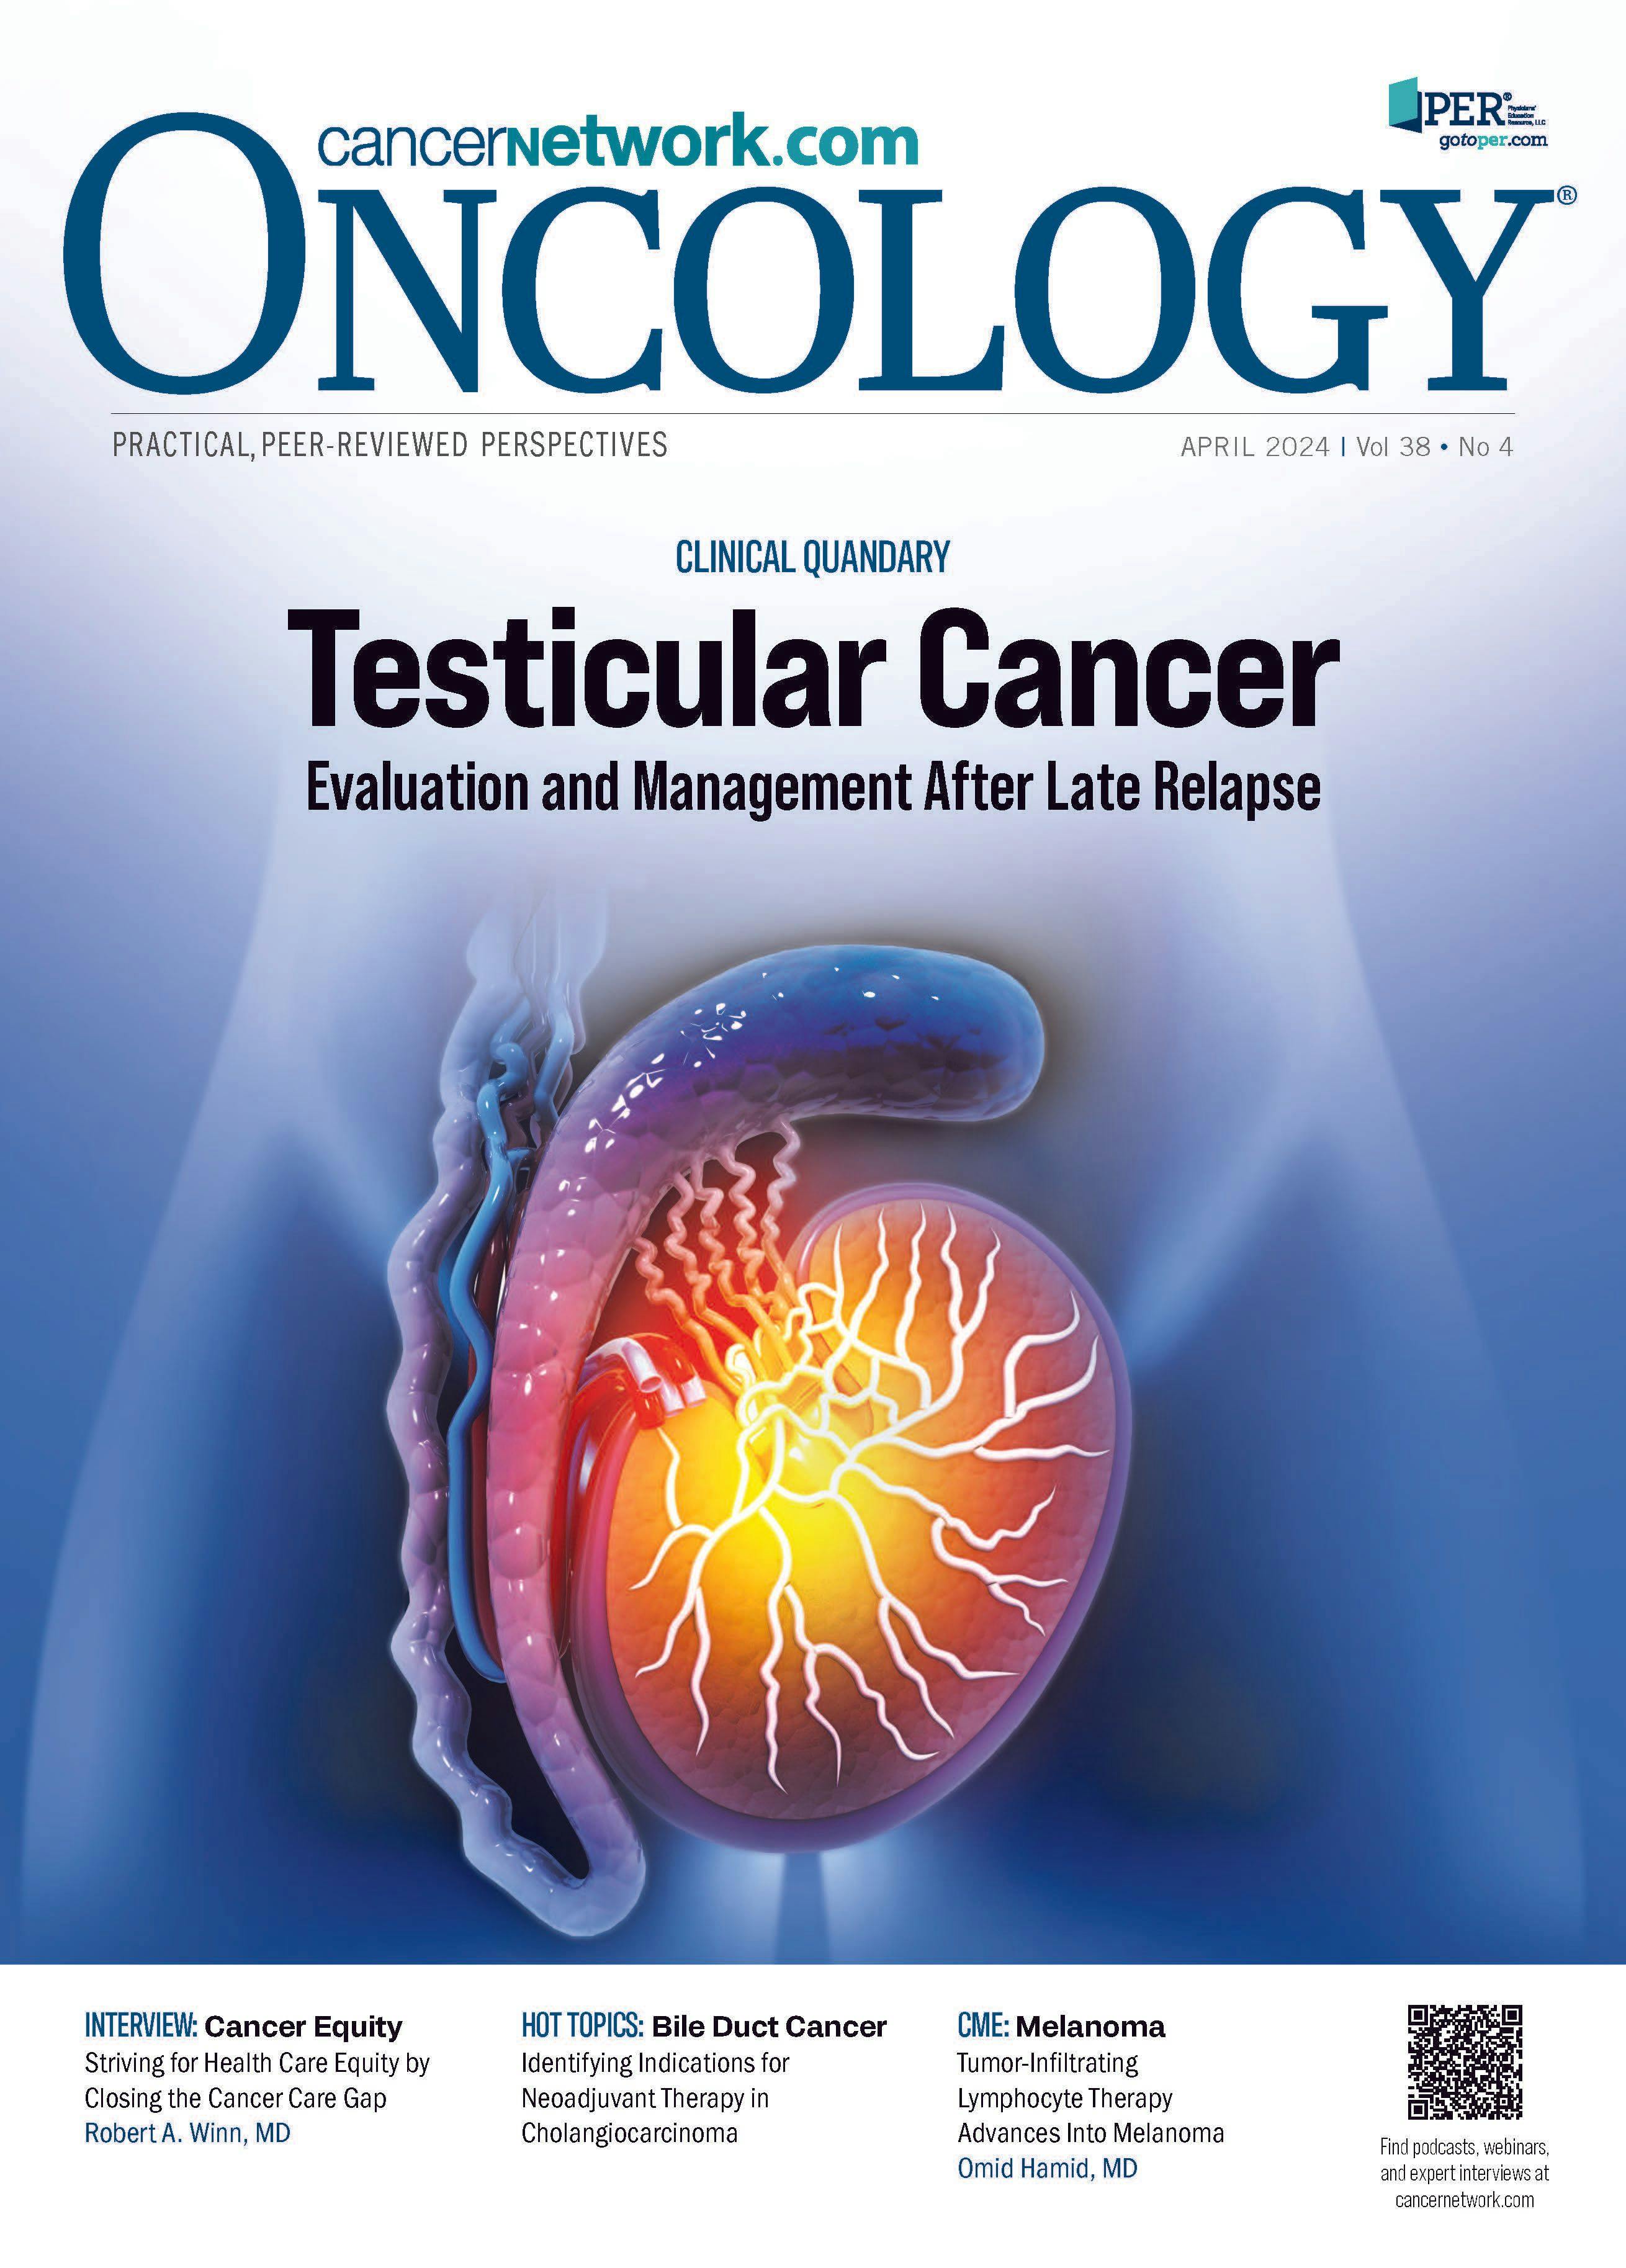 ONCOLOGY Vol 38, Issue 4